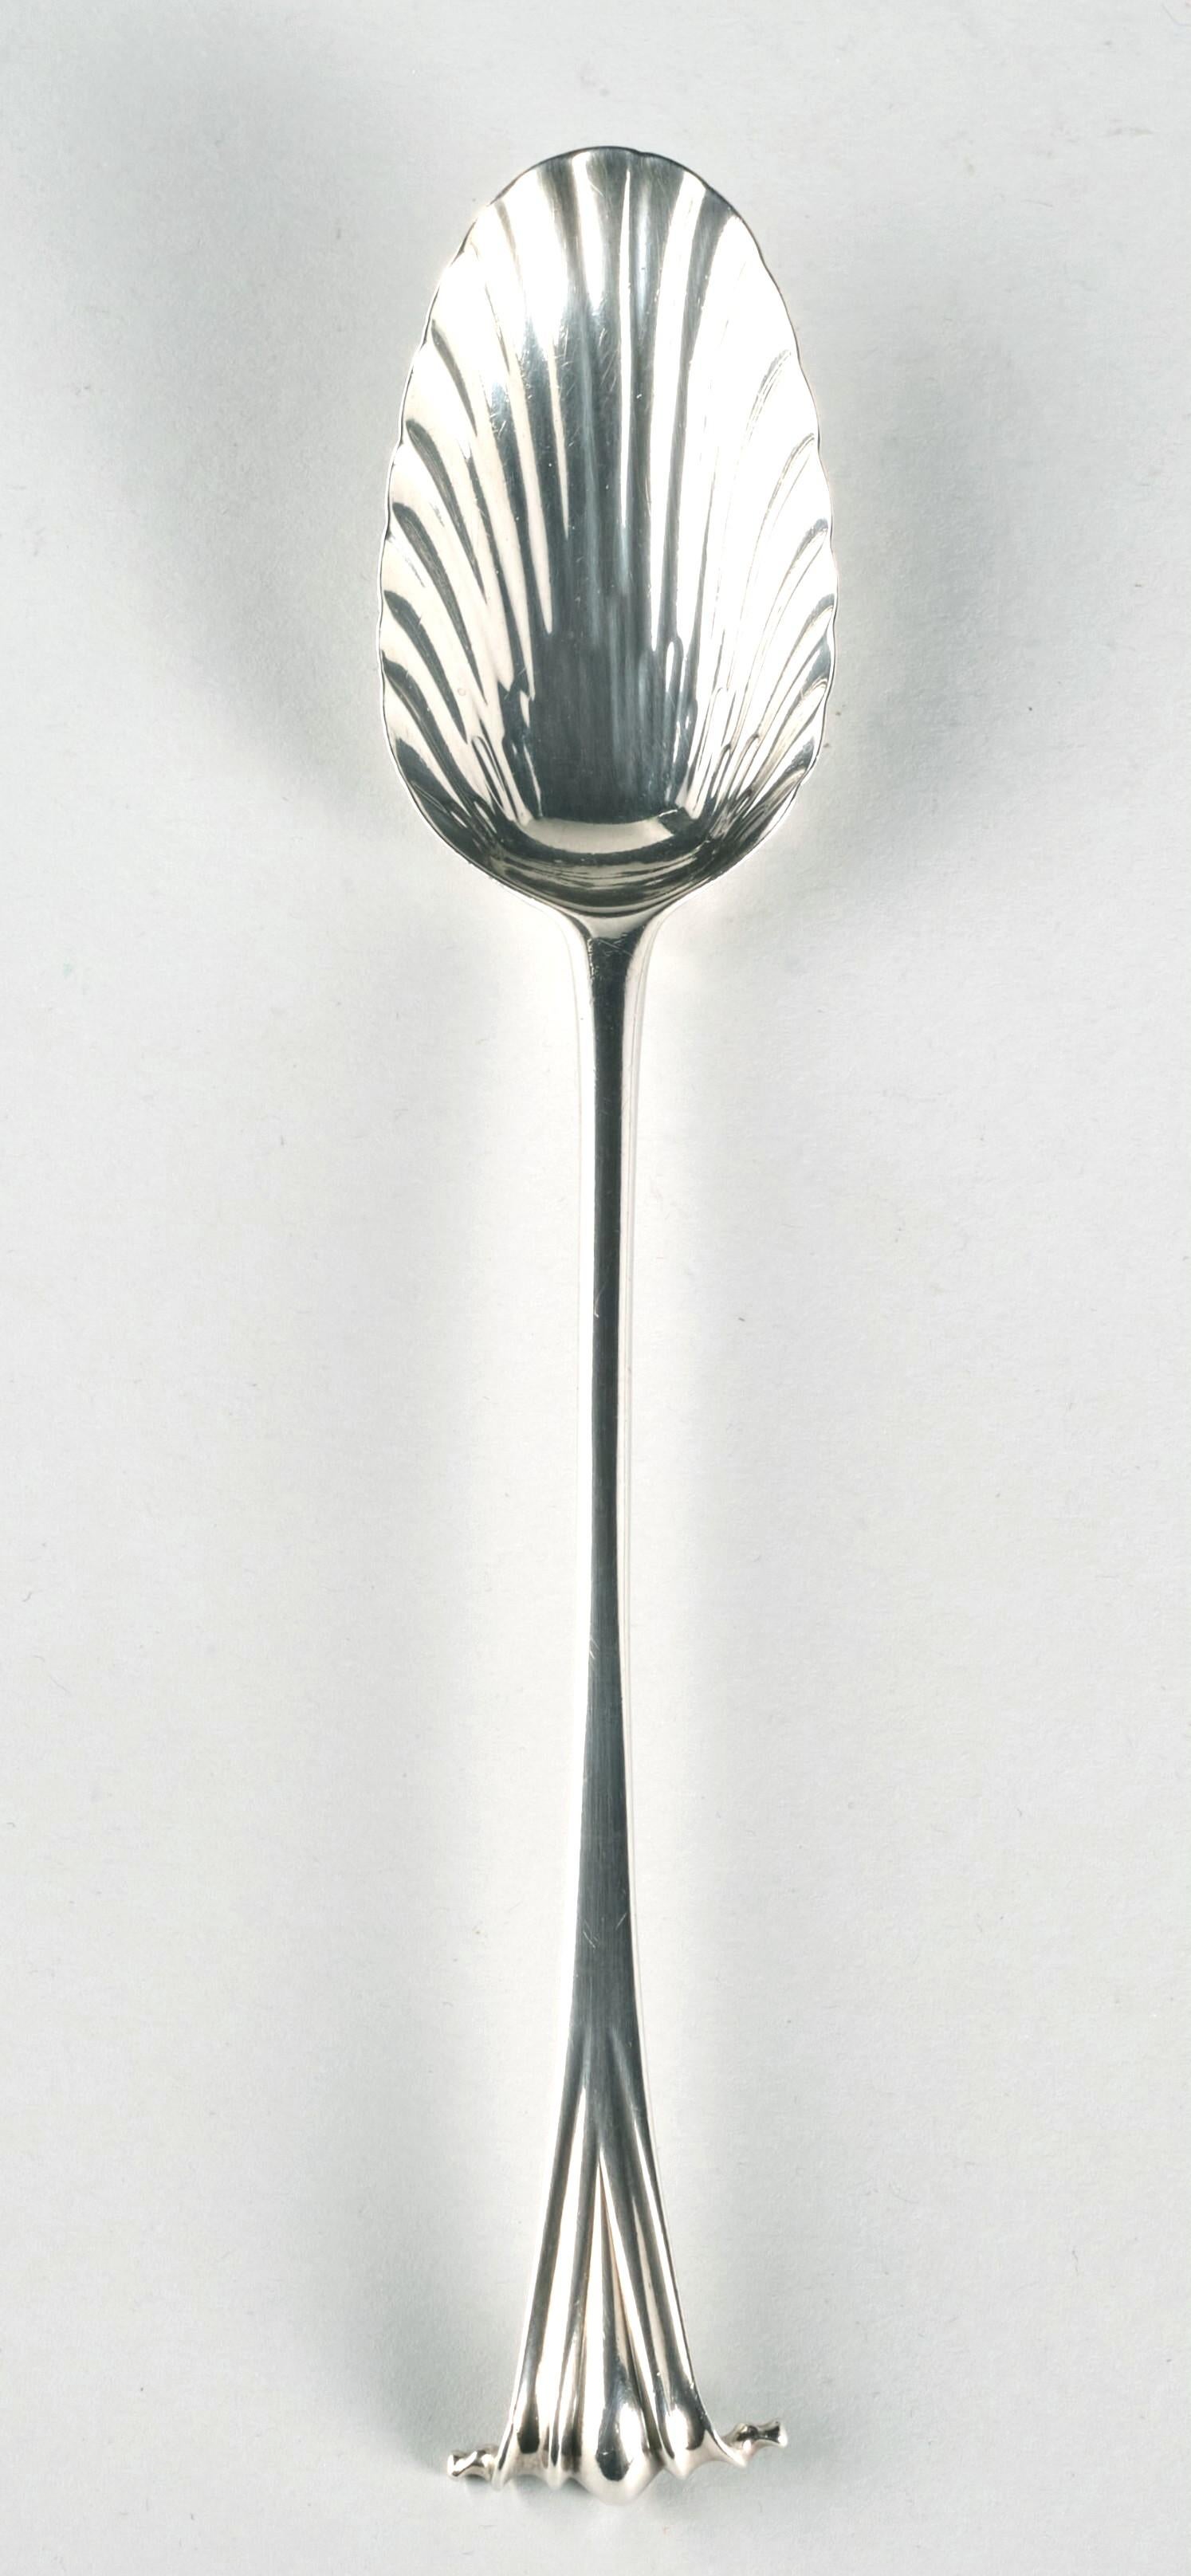 A very fine & elegant 18th century George III sterling silver serving spoon in the Onslow pattern. 
Showing a fluted oval bowl with a feathered edge, rising to a slender stem terminating to a fluted fan-shaped handle & scrolled ‘Onslow’ terminal.